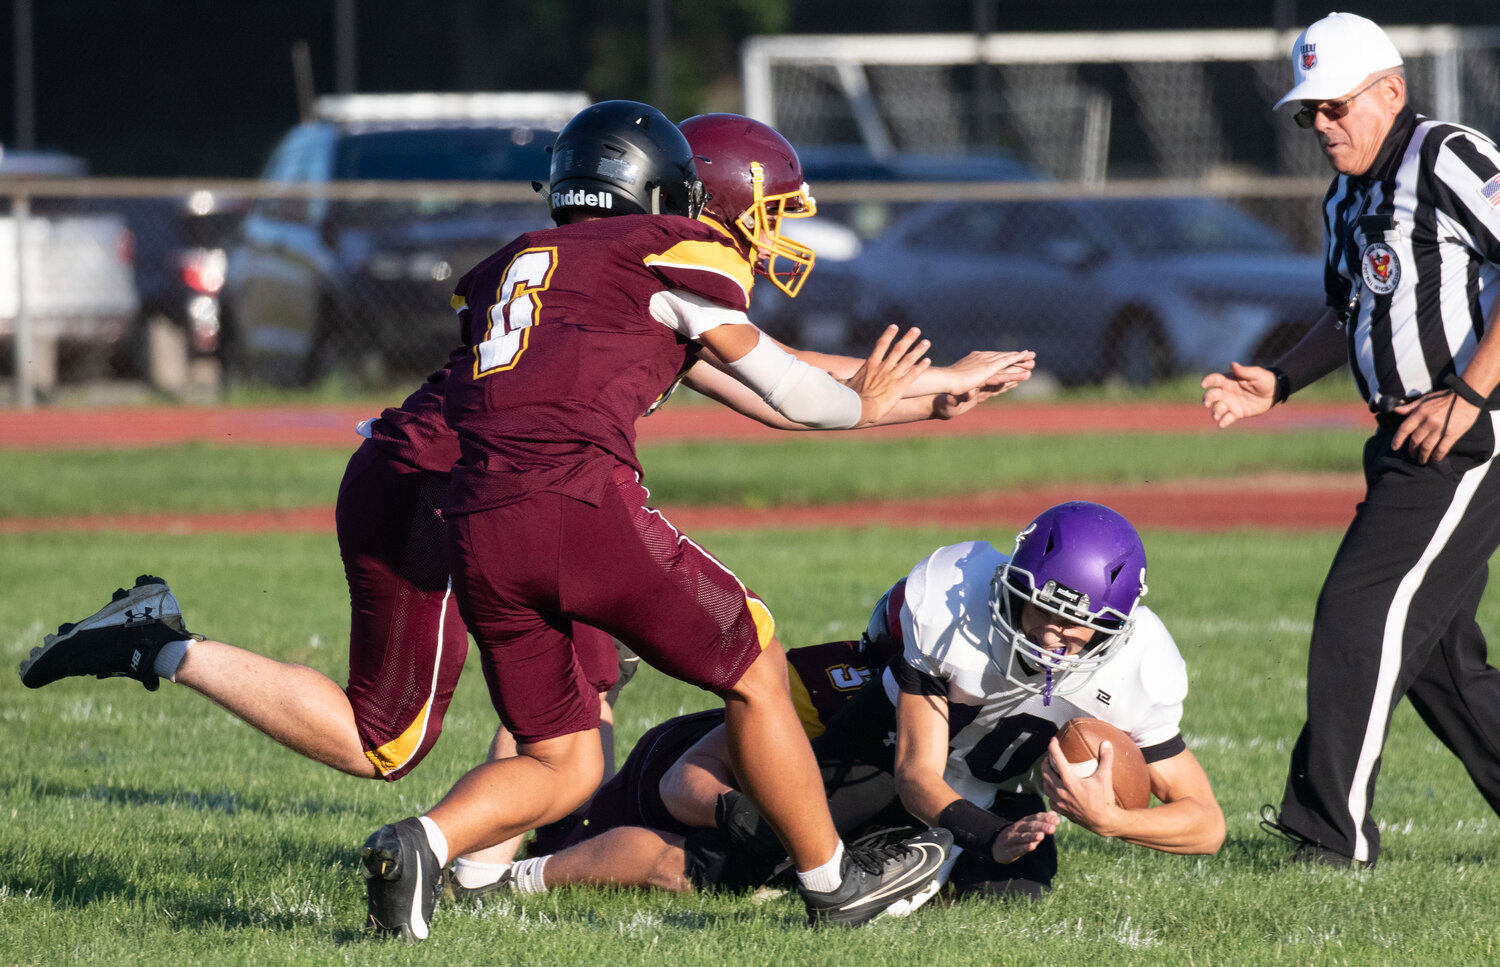 Ethan Quicksall and company tackle Huskies' quarterback Ethan Martel for a loss.